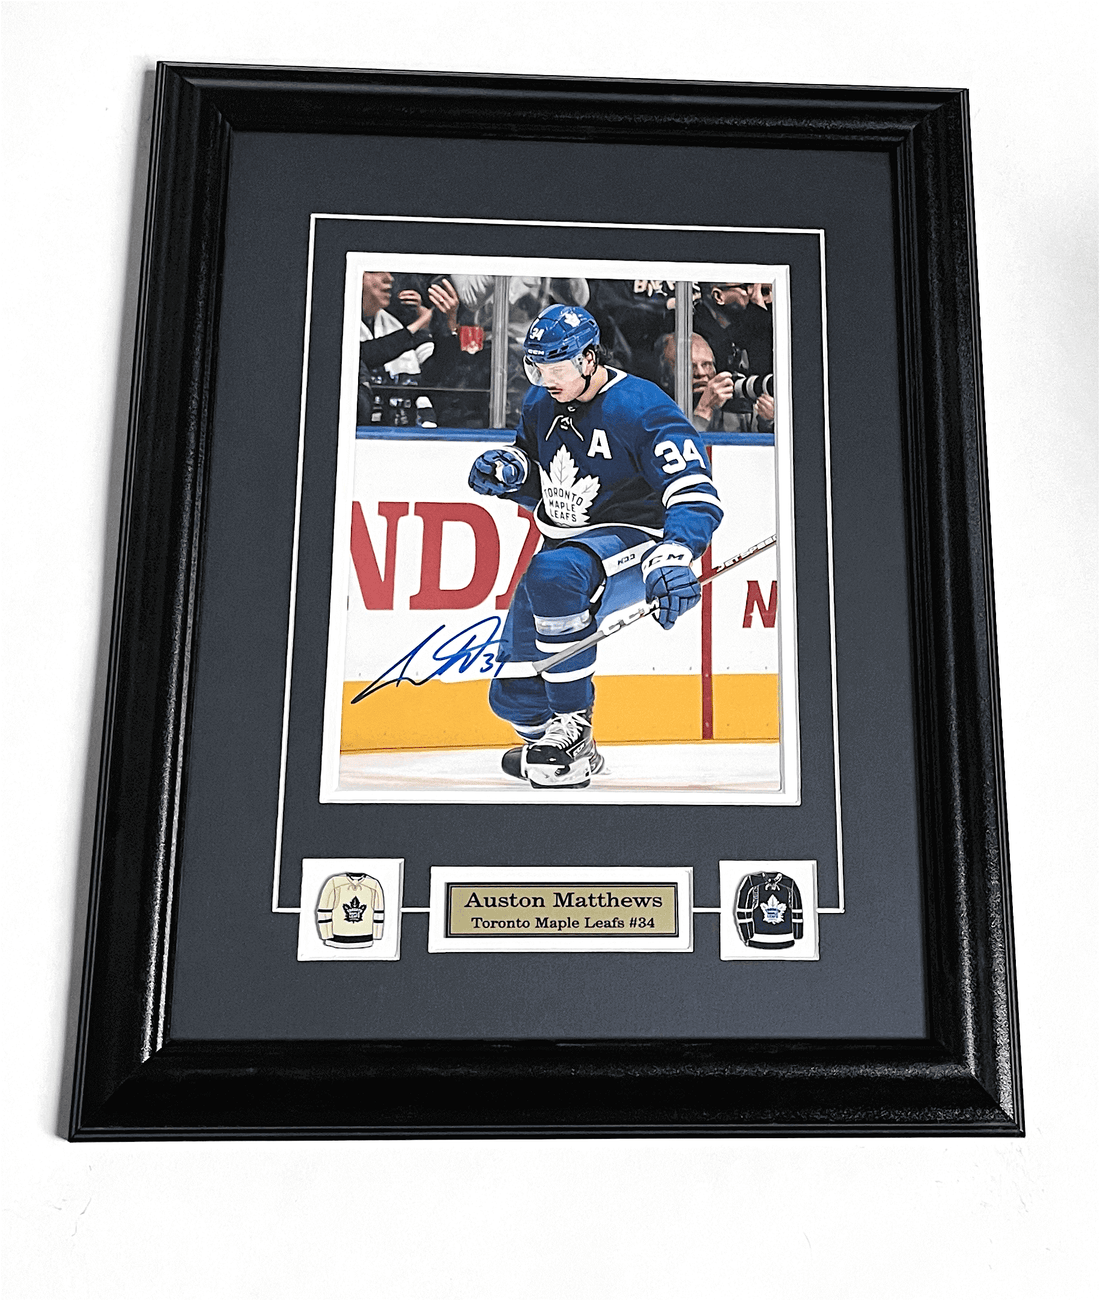 Auston Matthews Autograph Toronto Maple Leafs Framed Hockey Memorabilia. Accompanied with a Certificate of Authentication.